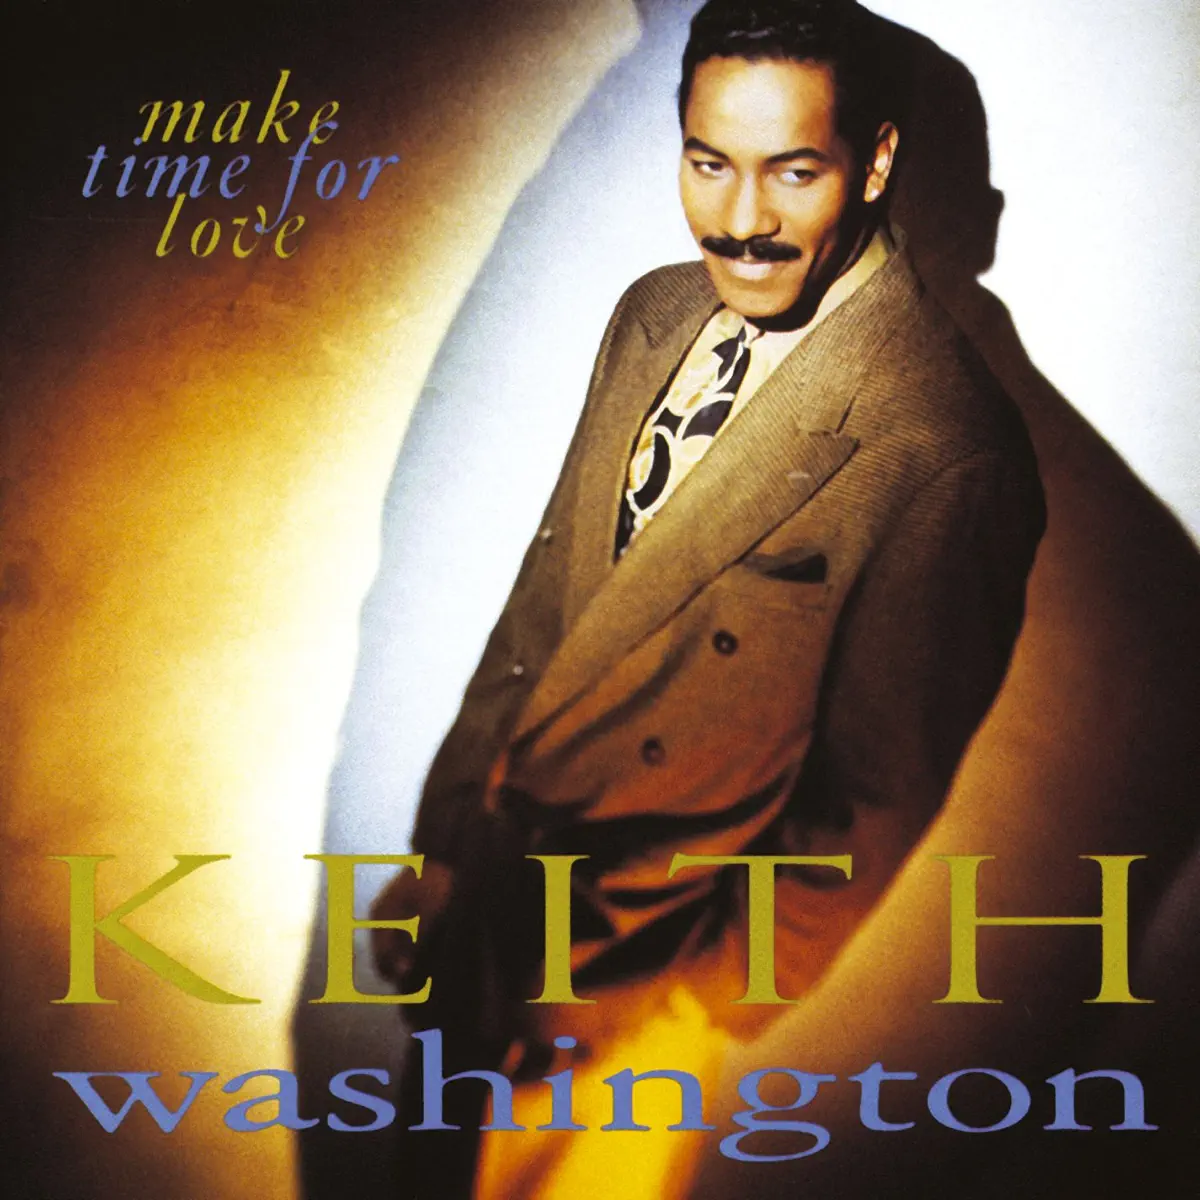 Keith Washington - Make Time for Love (1991) [iTunes Plus AAC M4A]-新房子